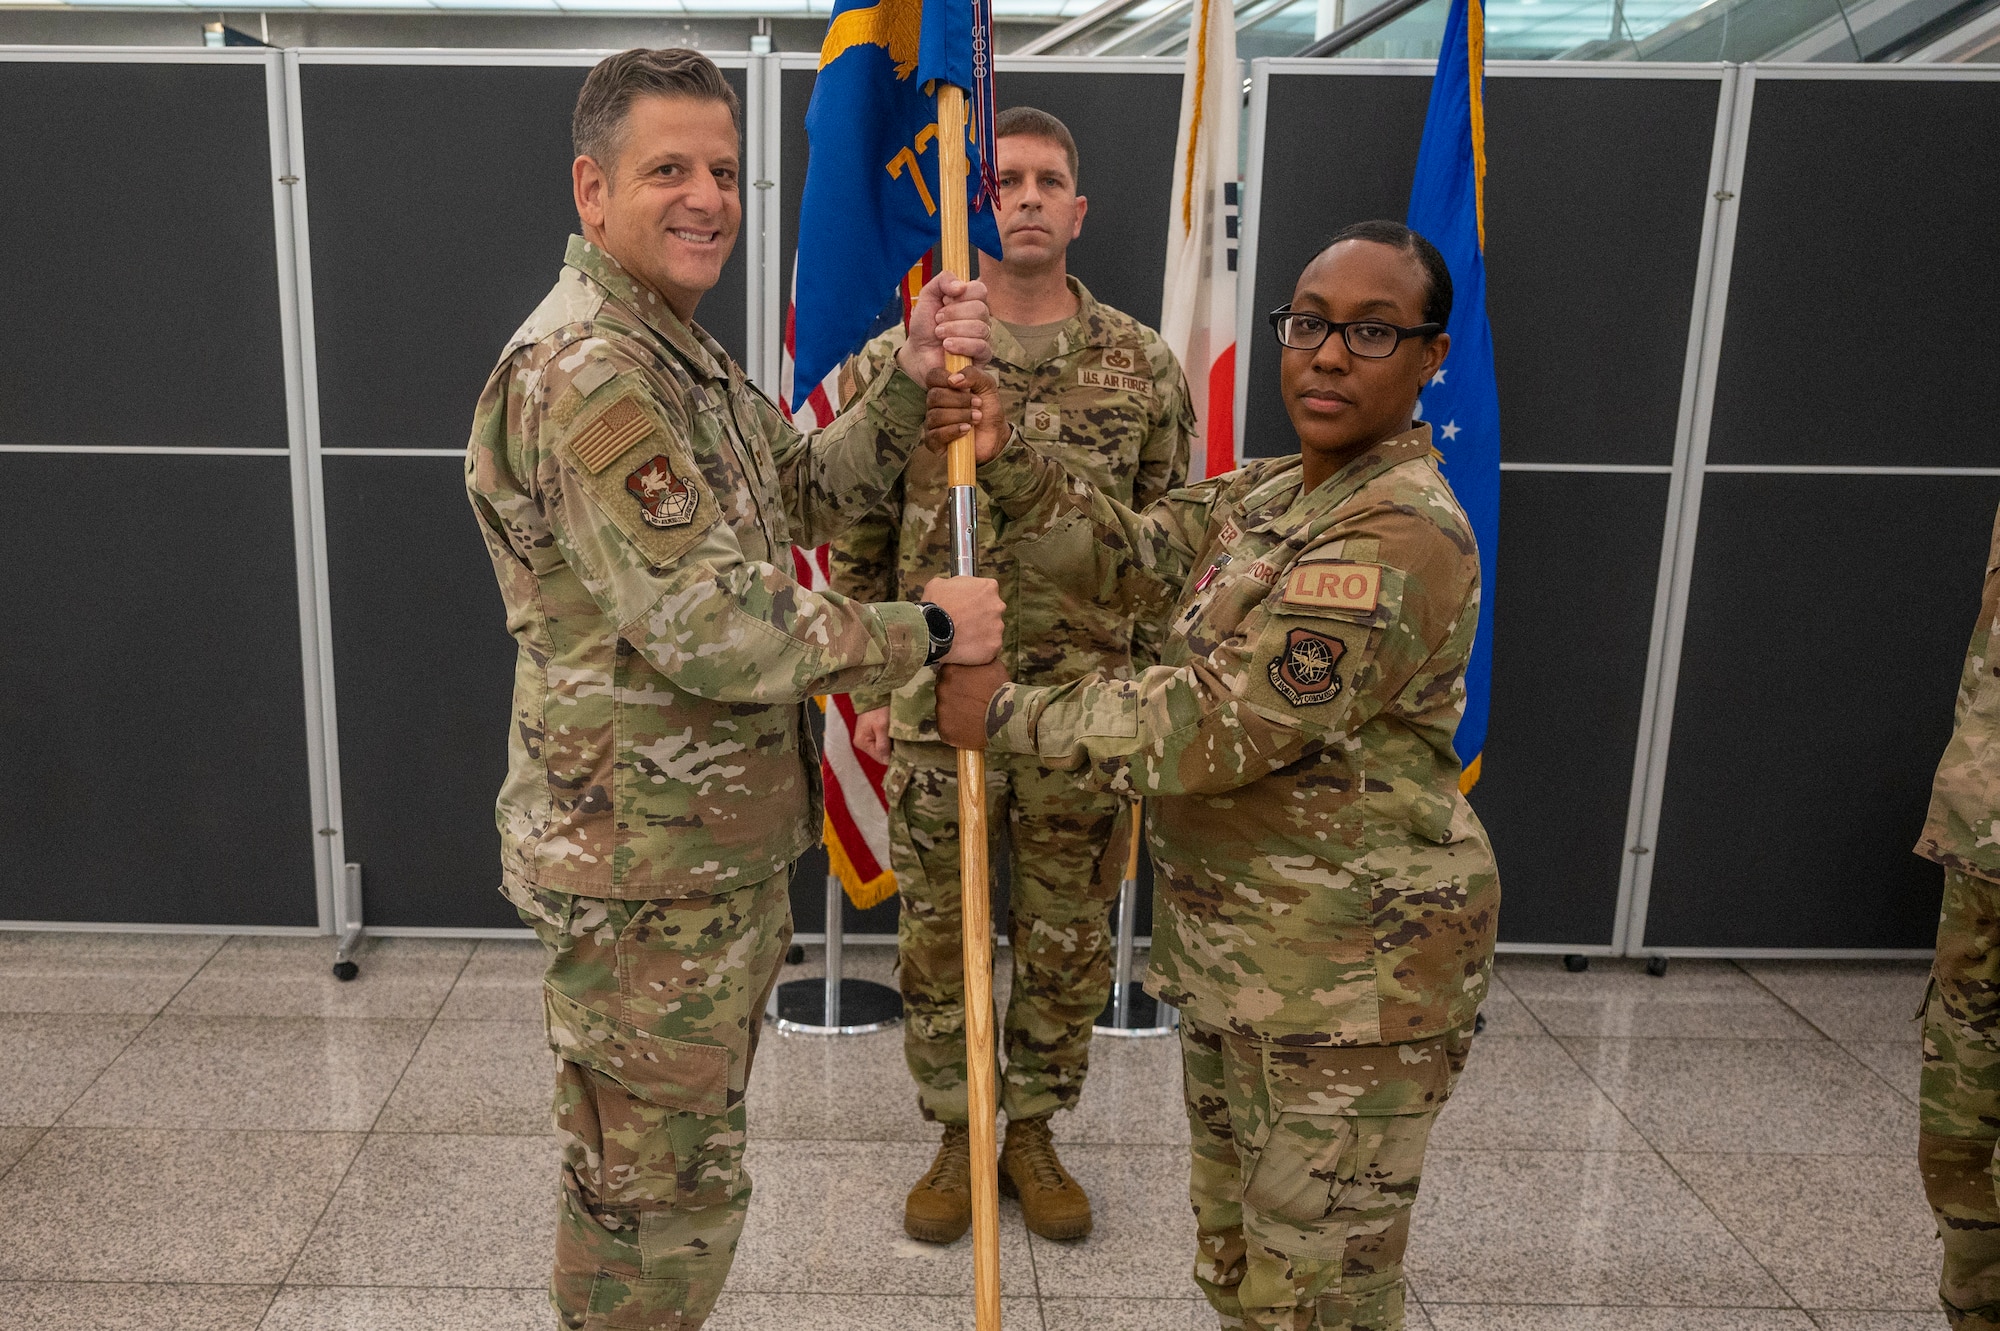 U.S. Air Force Col. Christopher Kiser, left, 515th Air Mobility Operations Group commander, receives the guidon from Lt. Col. Sabrina Winter, 731st Air Mobility Squadron outgoing commander,  at Osan Air Base, Republic of Korea, June 23, 2023. In a change of command ceremony, the guidon symbolizes the transfer of command, the authority and responsibility associated with it.  (U.S. Air Force photo by Senior Airman Aaron Edwards)